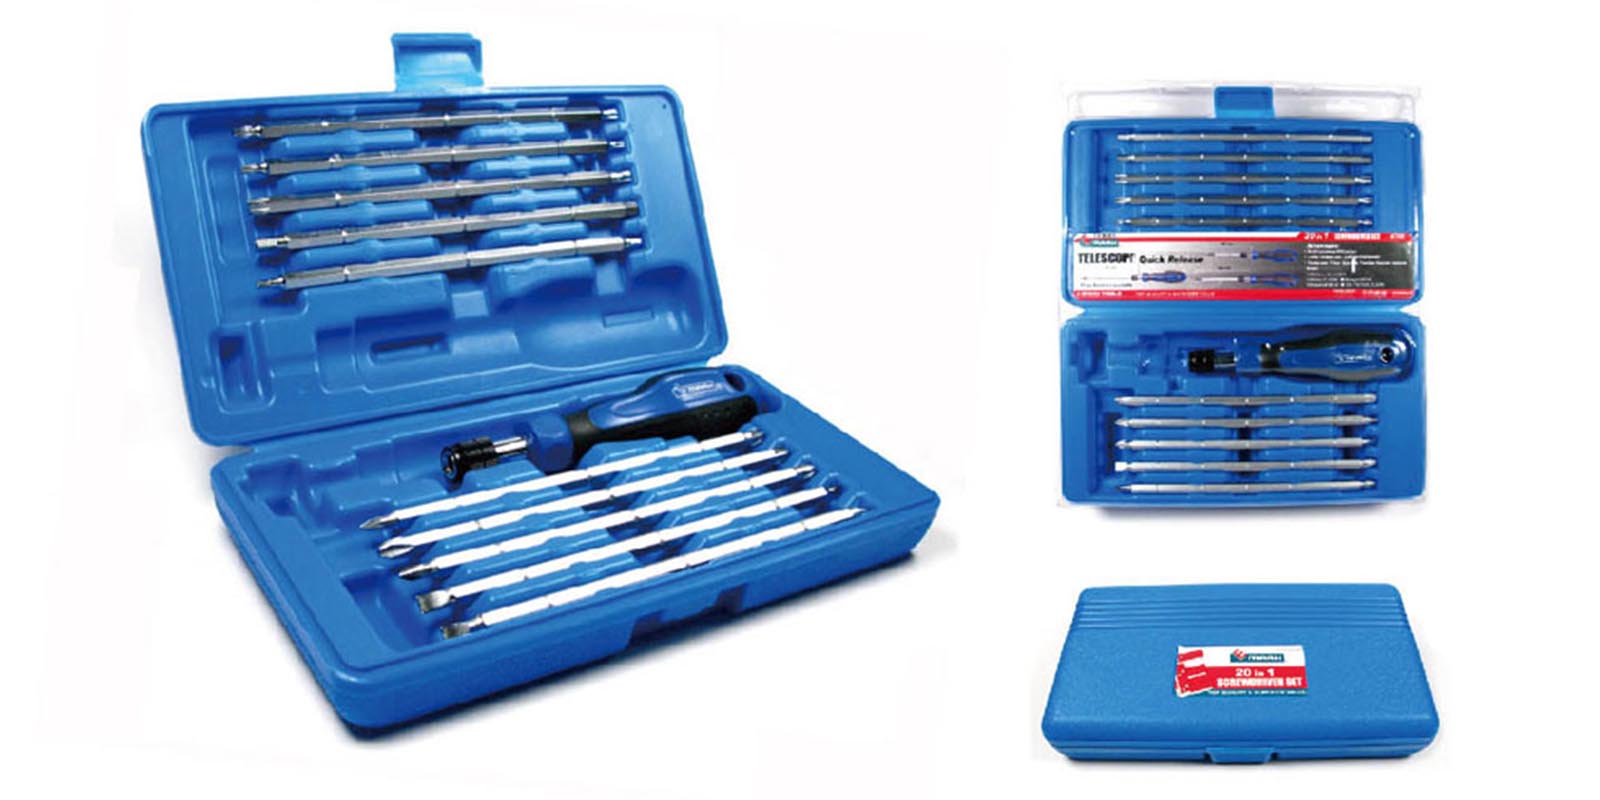 20-IN-1 MULTI-FUNCTION SETS